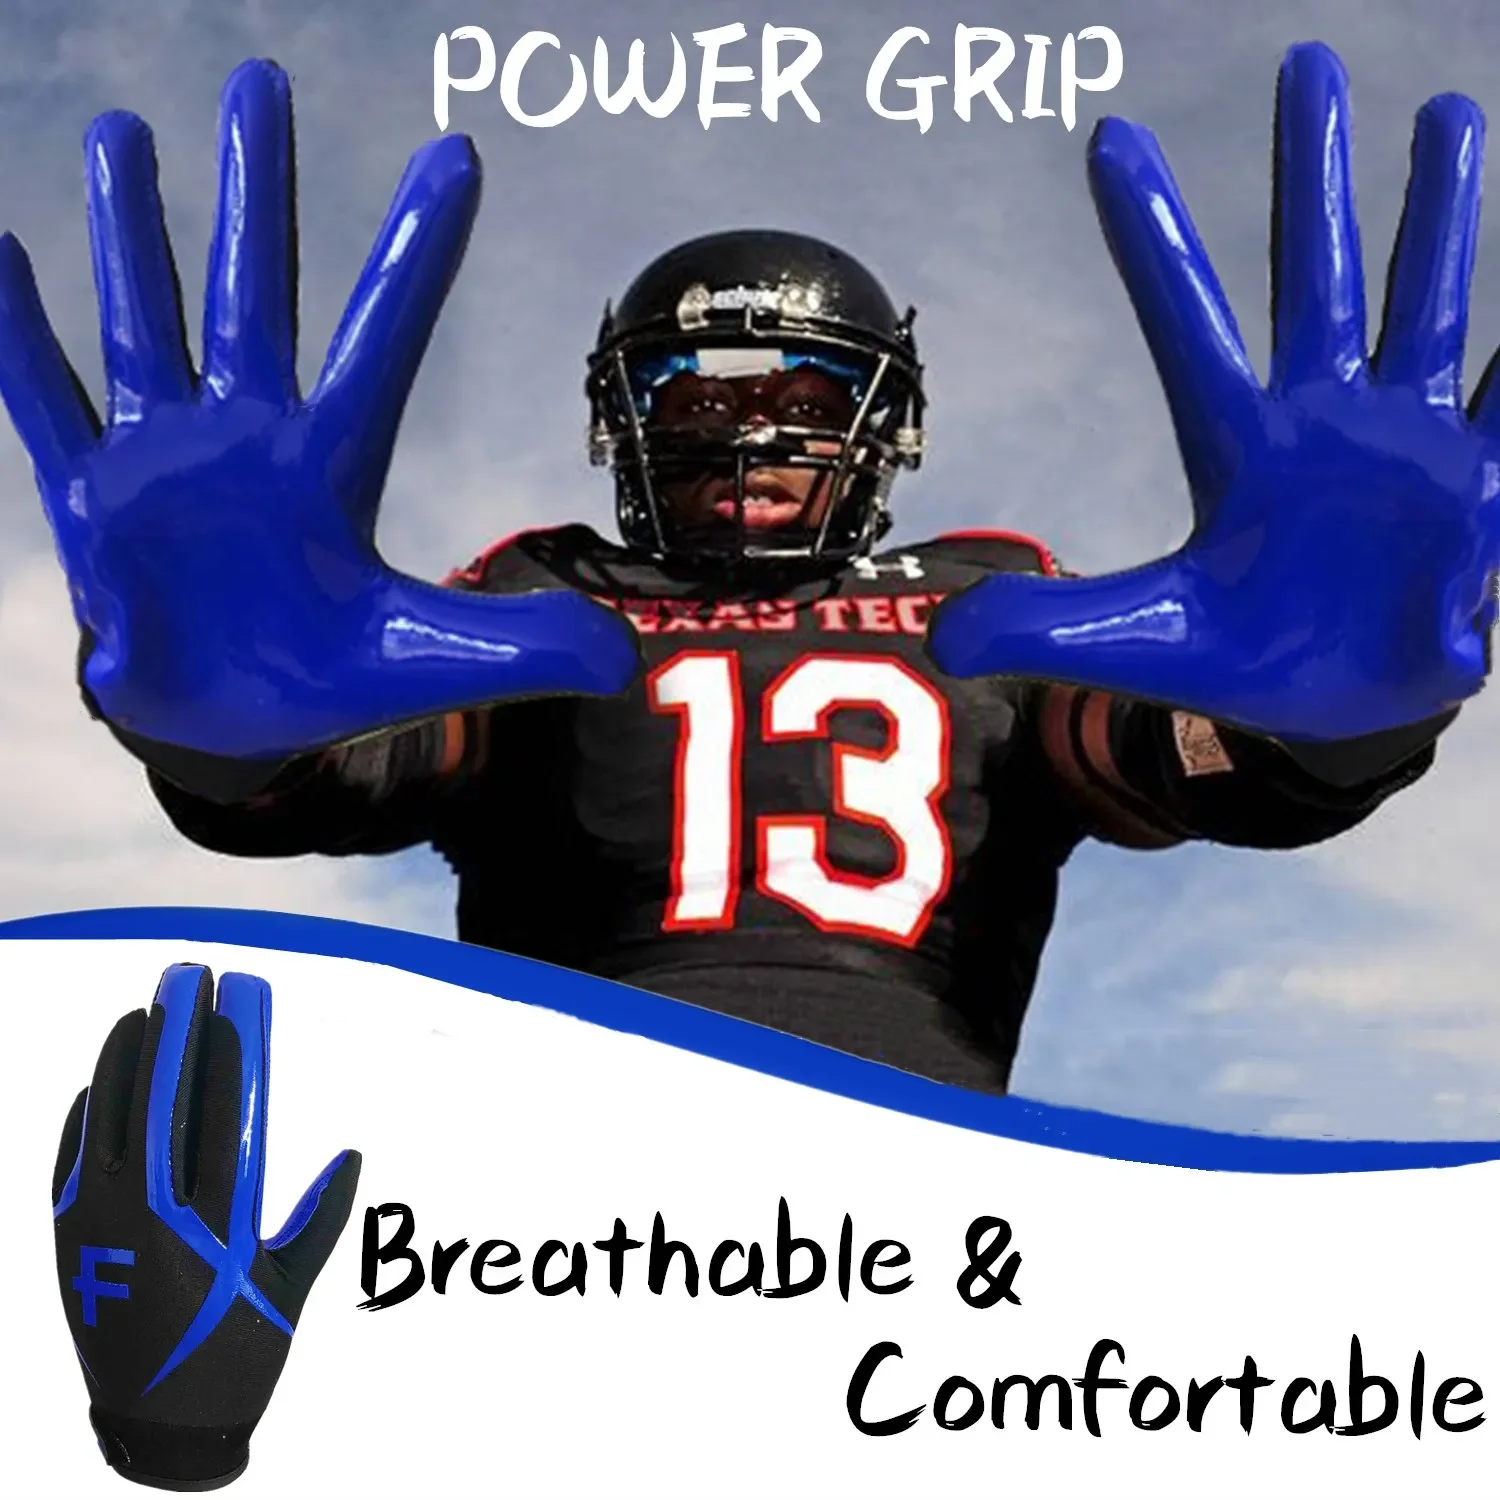 Professional Youth Kid American Football Gloves Receiver Soccer Goalkeeper Glove Riding Boys Girls 5-14 years old Drop Shipping